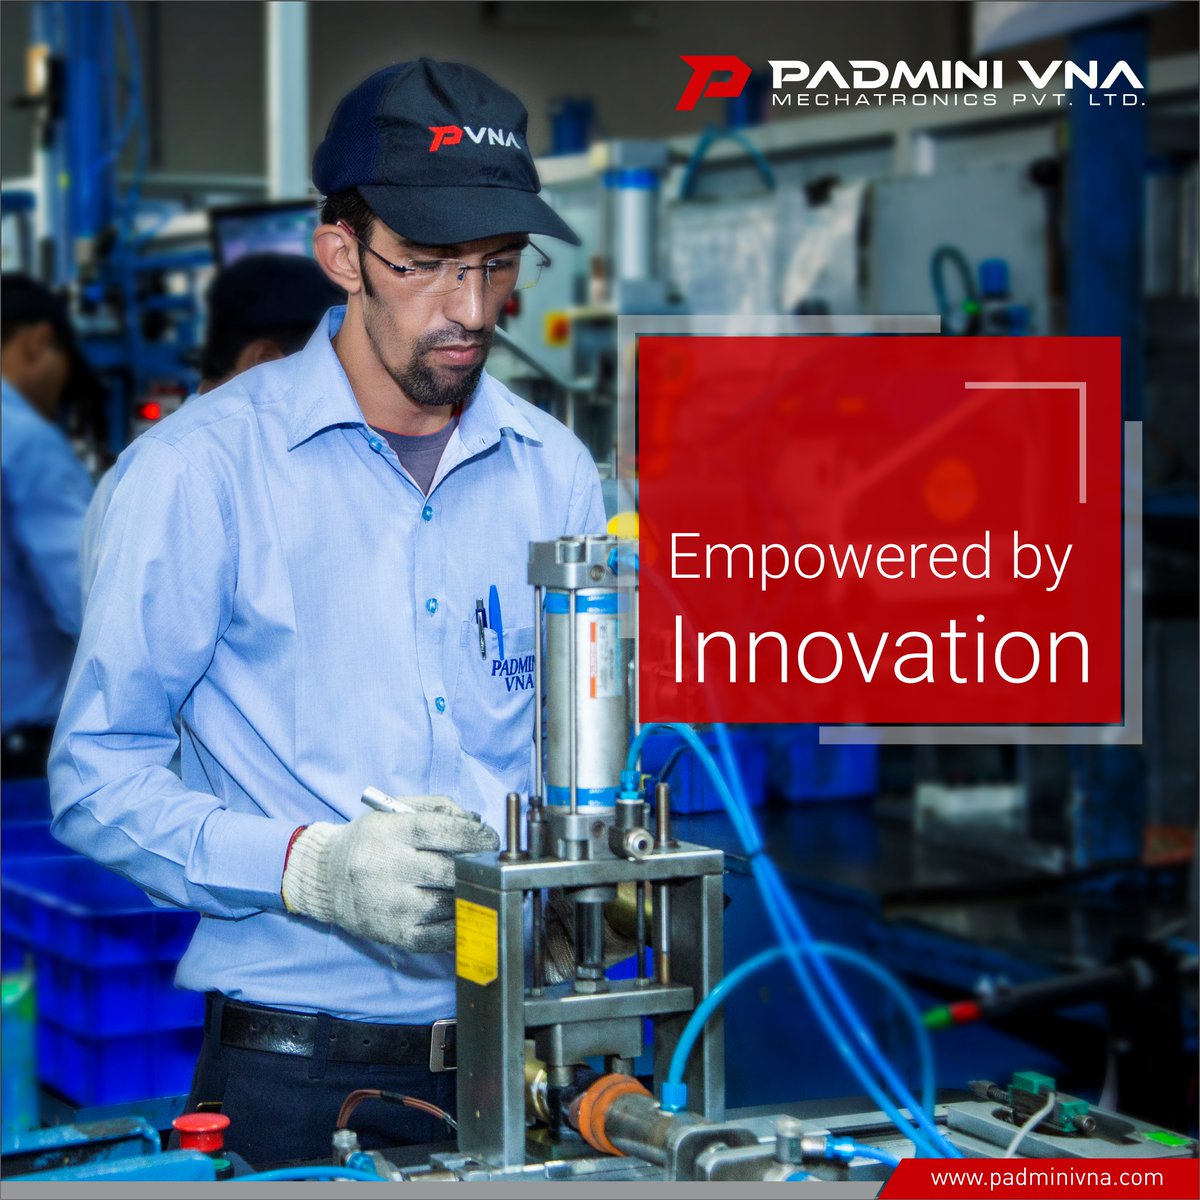 At #Padmini VNA our experts are continuously driving us towards cutting-edge innovations. With a portfolio of 45 patents, we demonstrate our efforts to re-invent the emission reduction by incorporating new developments.
 #PVNA #Mechatronics #Automotive #DrivenbyInnovation